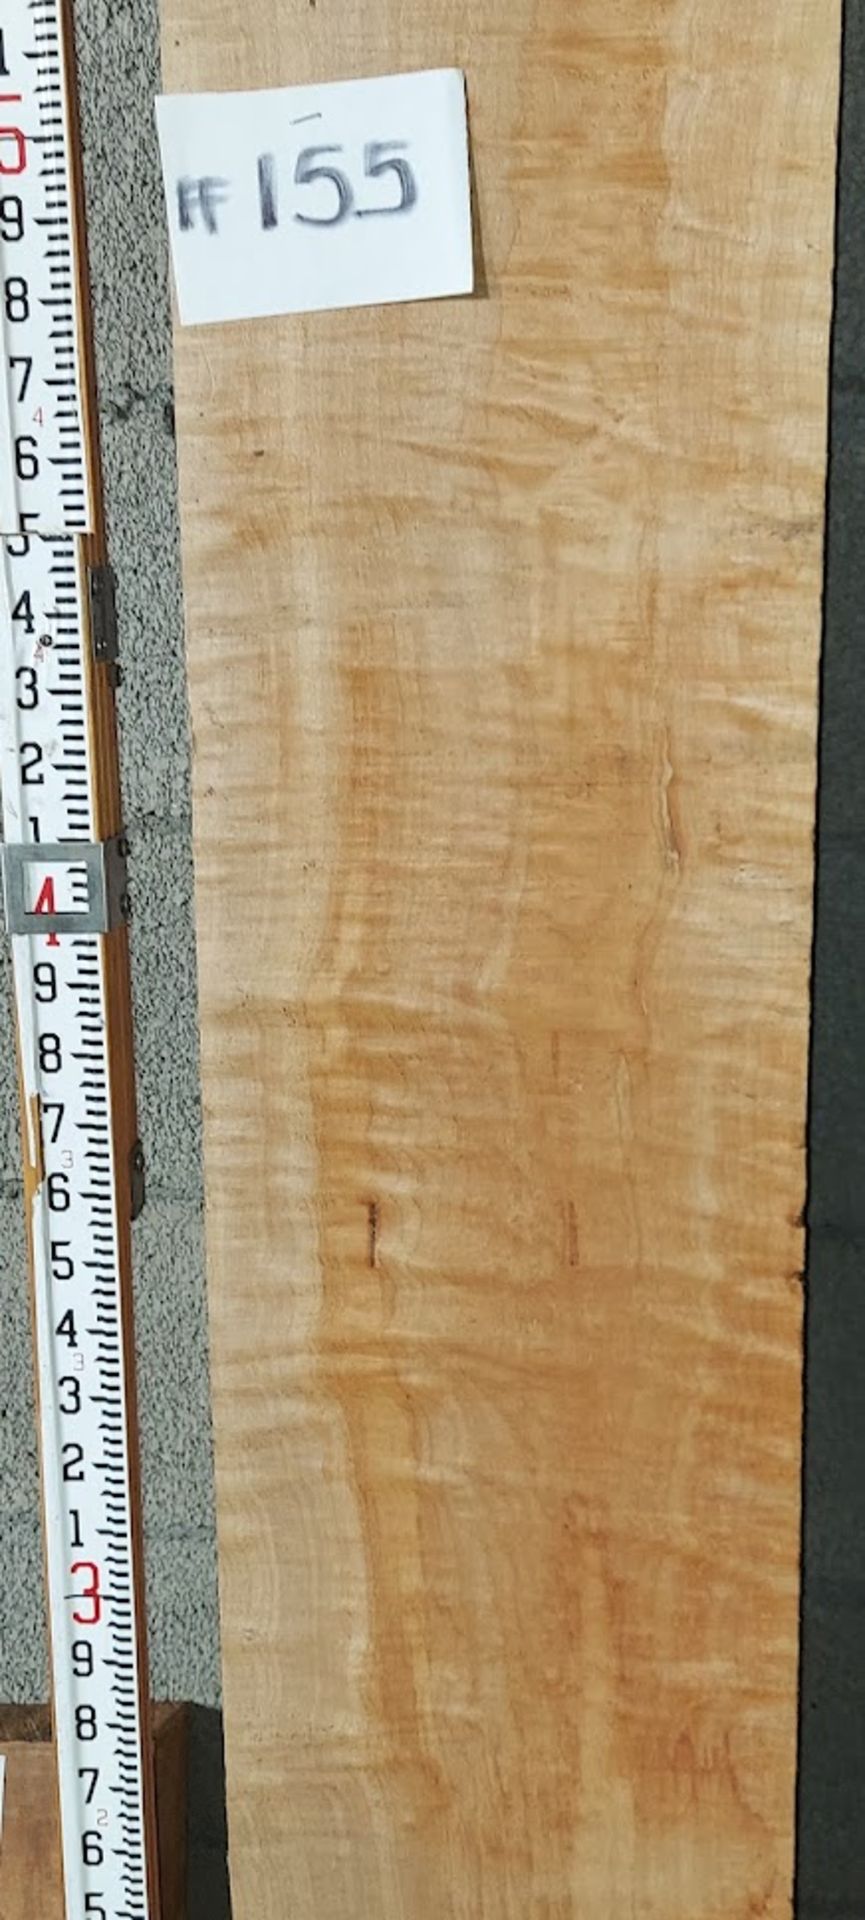 Maple Hardwood Lumber Slab, Size is approx. 96" x 9-1/2" x 2-5/8" Thick, Curly - Image 2 of 3